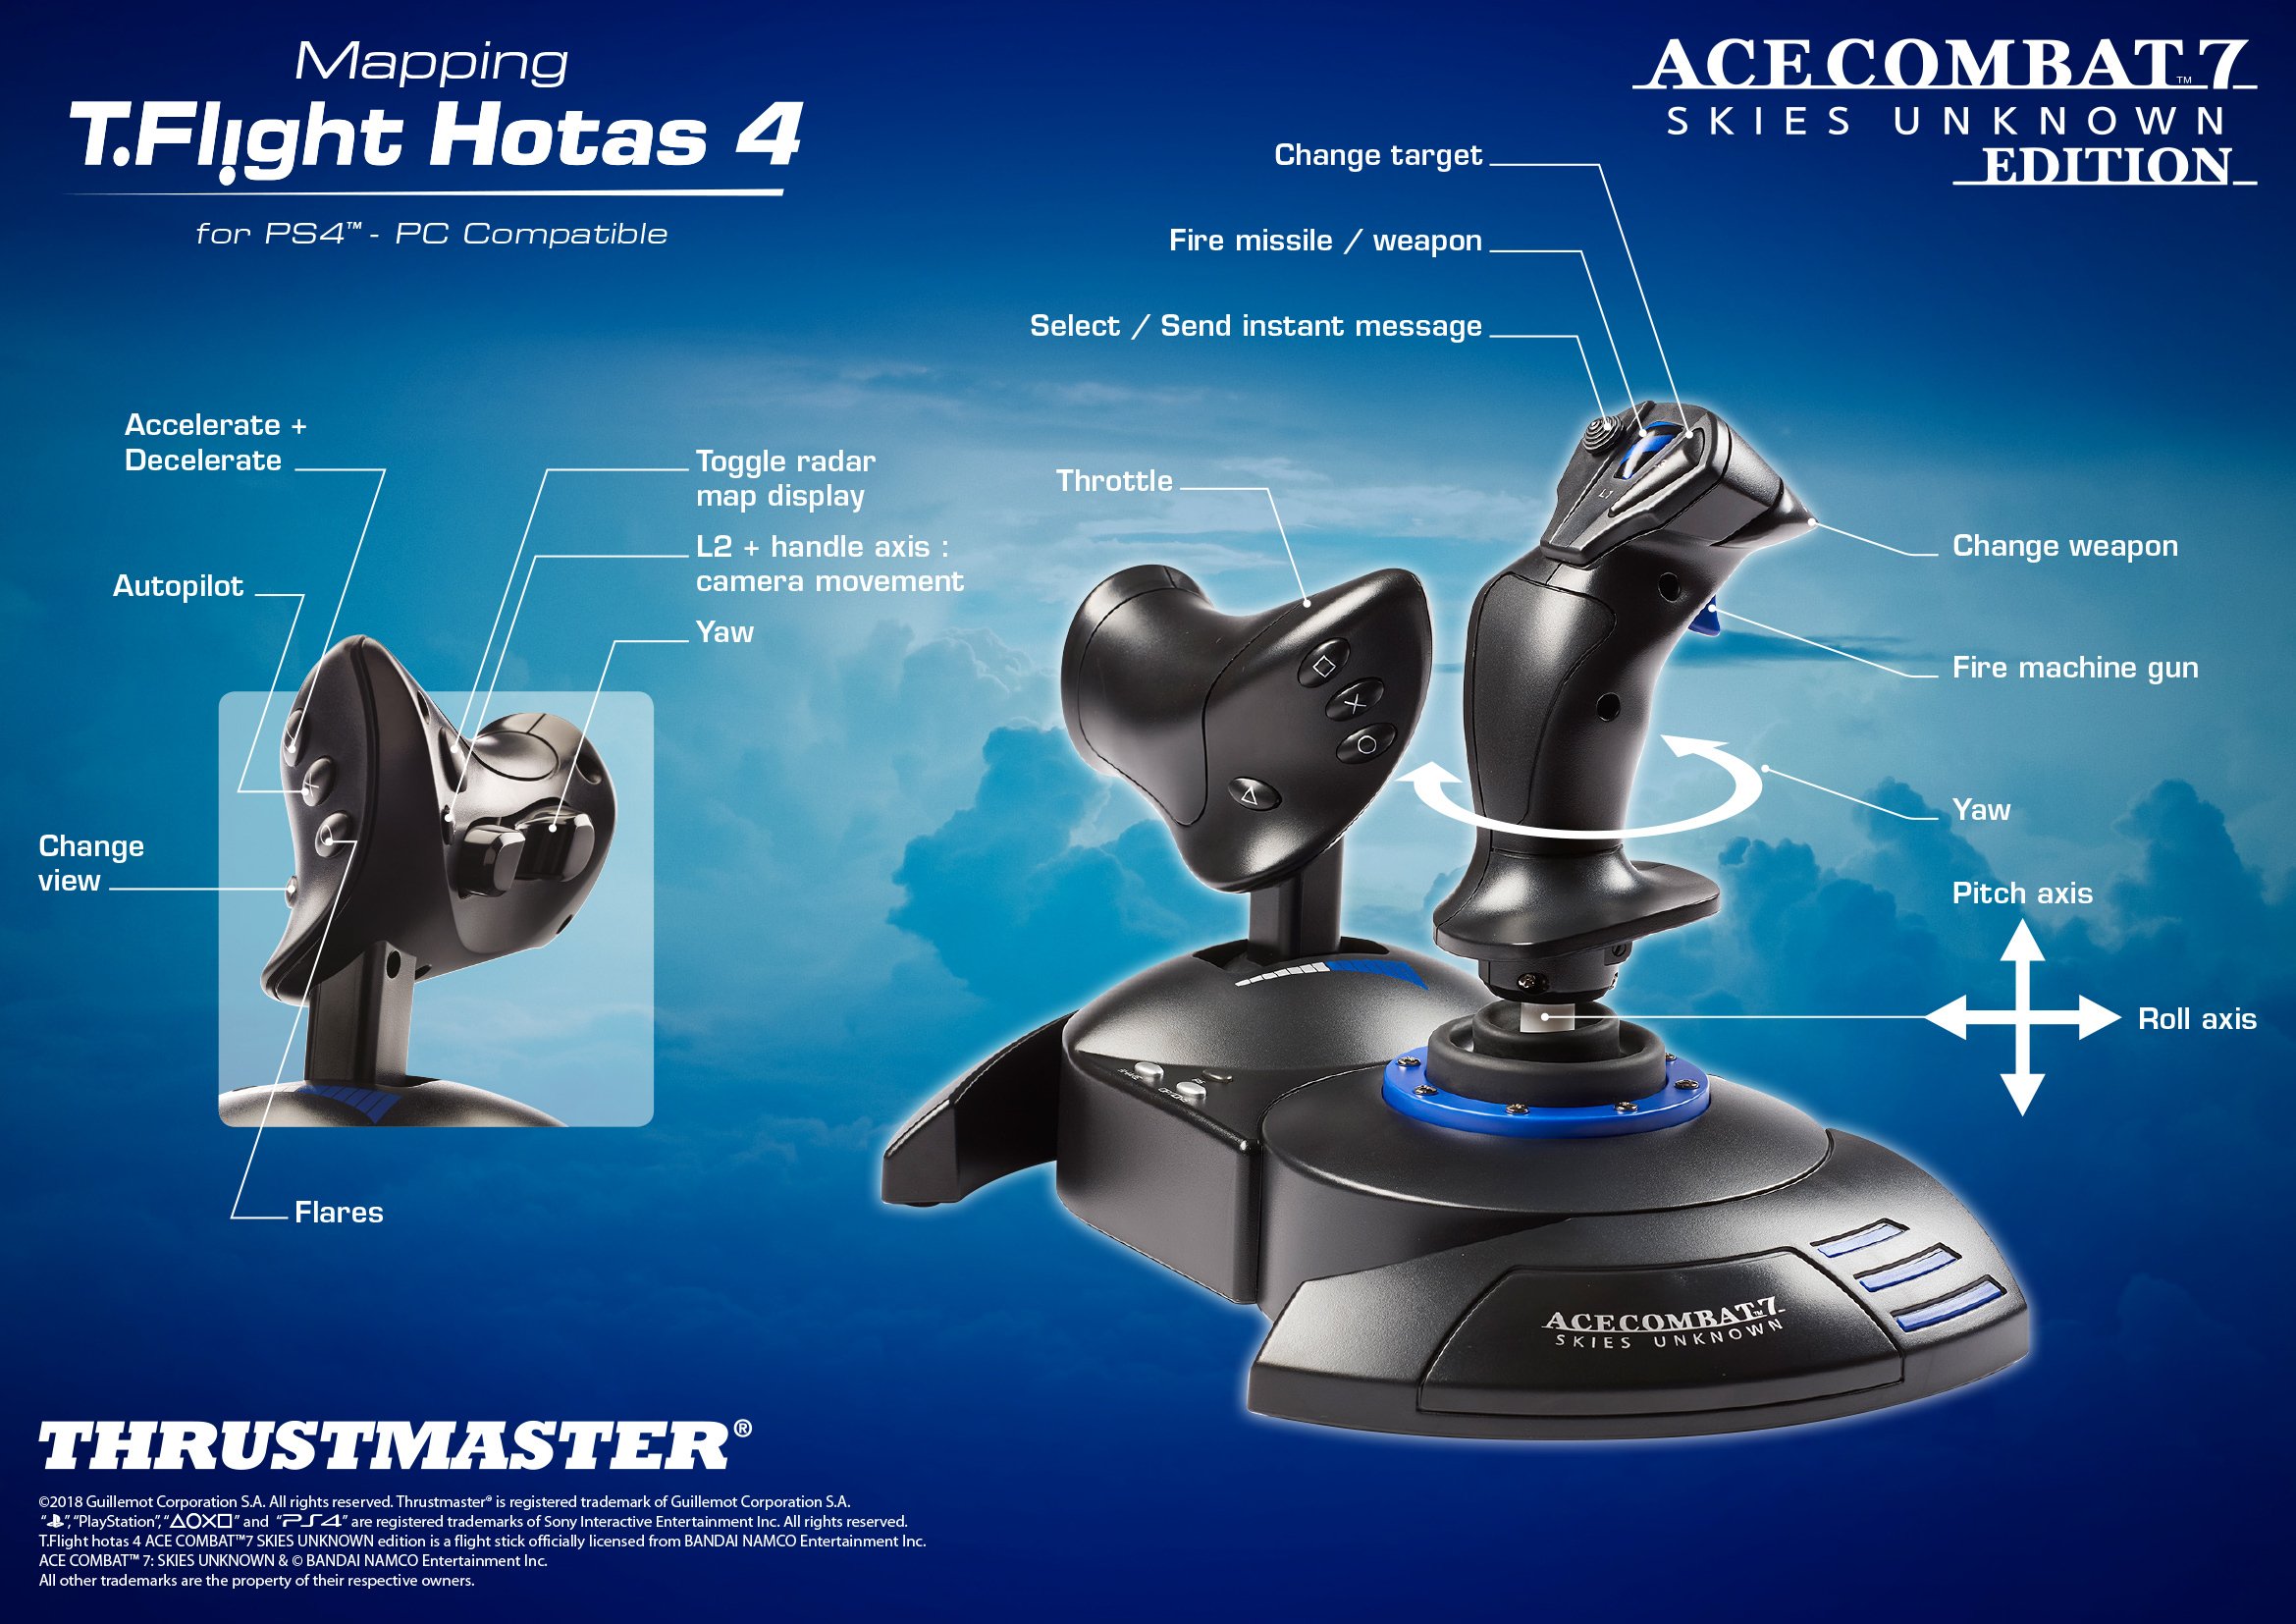 Verdampen tempo Mis Thrustmaster Official on Twitter: "We are exactly one month away from the  launch of #AceCombat7 from @BandaiNamcoUS &amp; our Ace Combat 7 Edition  T.Flight Hotas 4 joystick &amp; throttle! Who's gonna be